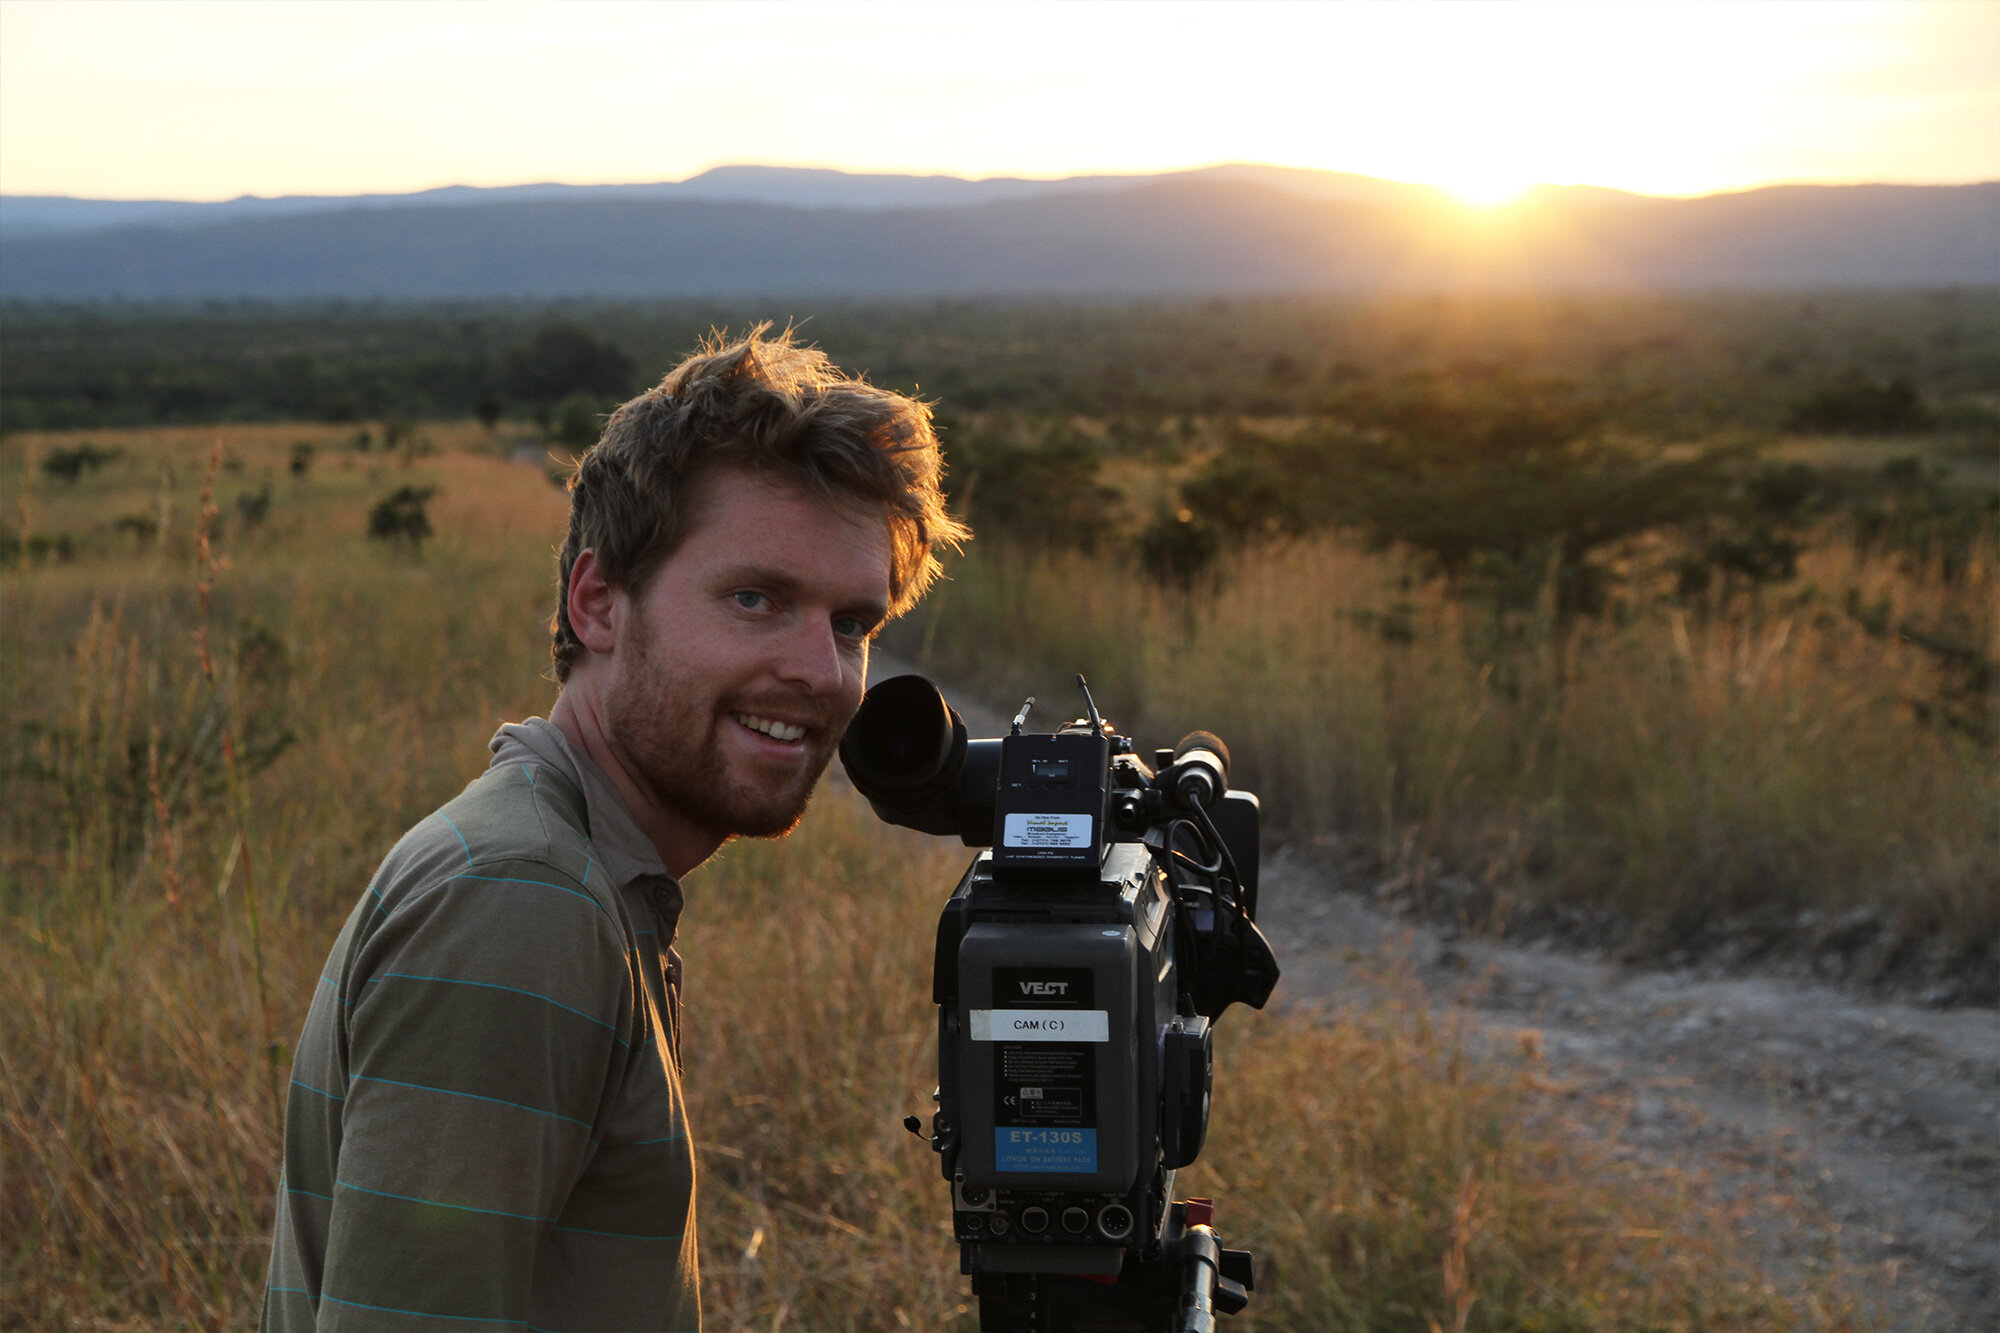 Gwyn looking fresh-faced in Zambia on one of his first shoots